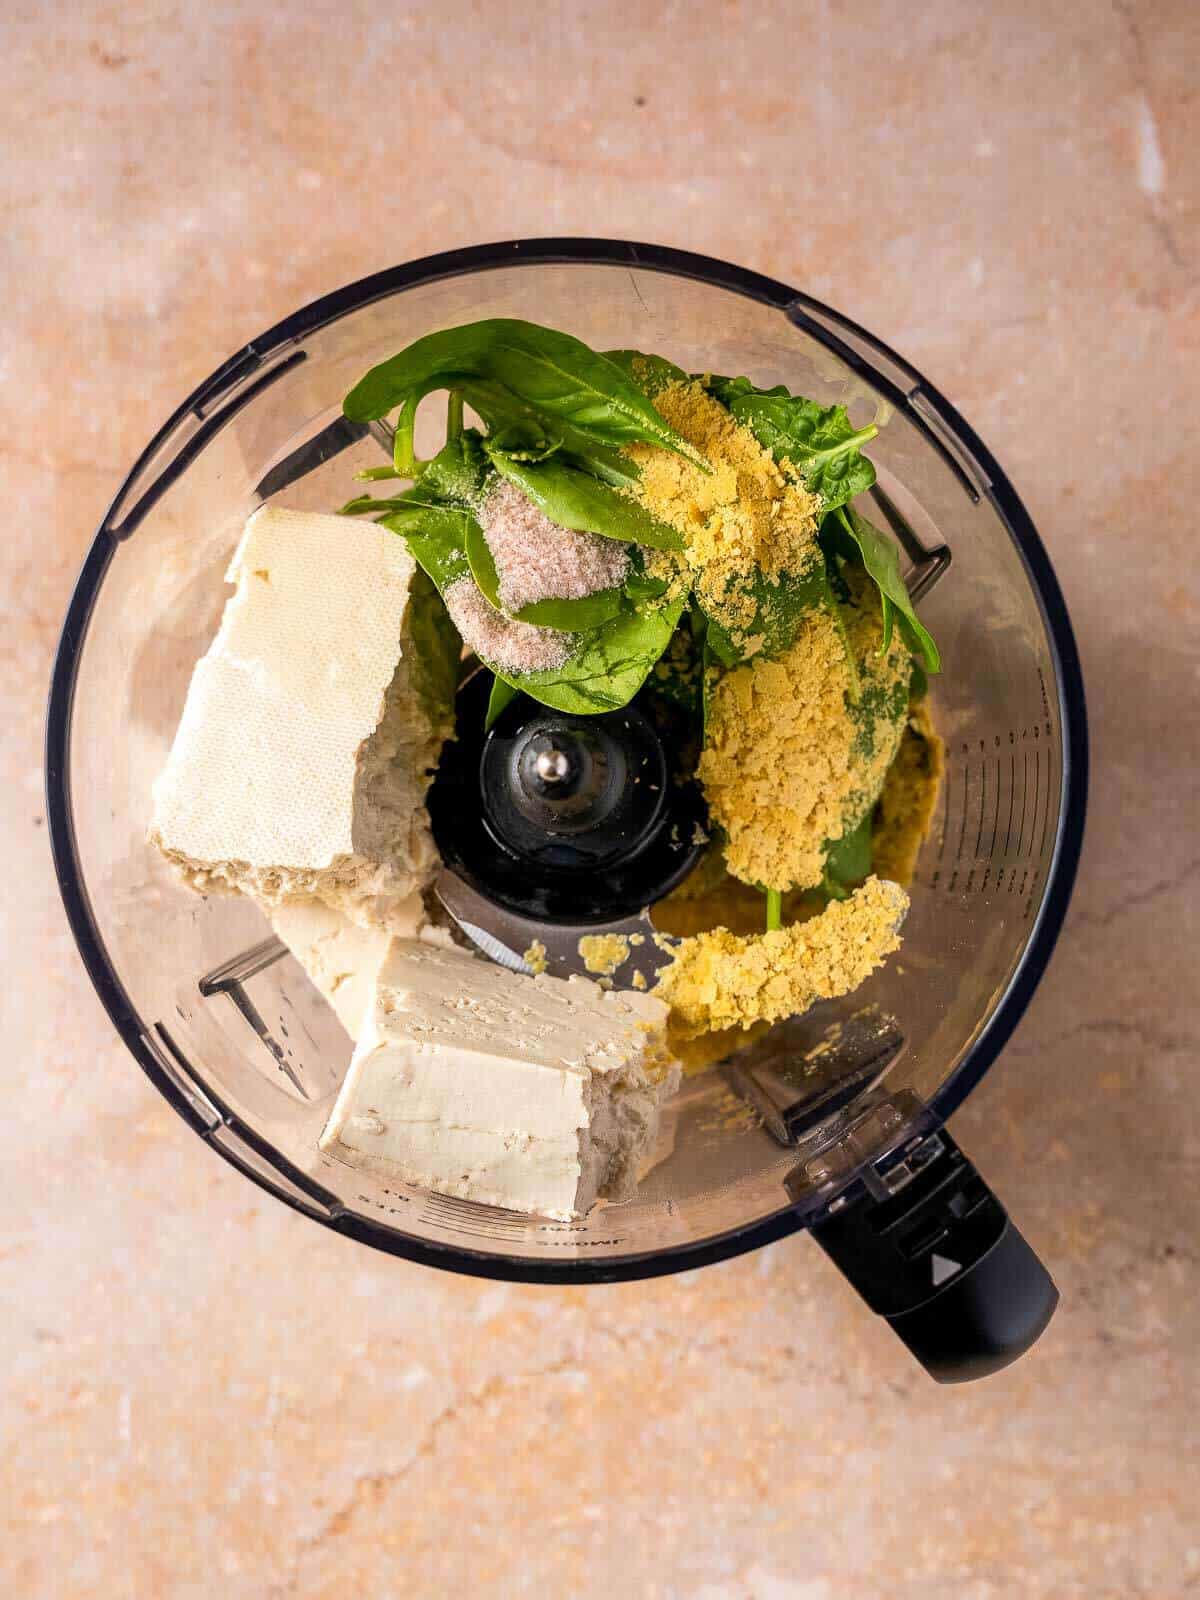 add all the vegan ricotta ingredients to the food processor.